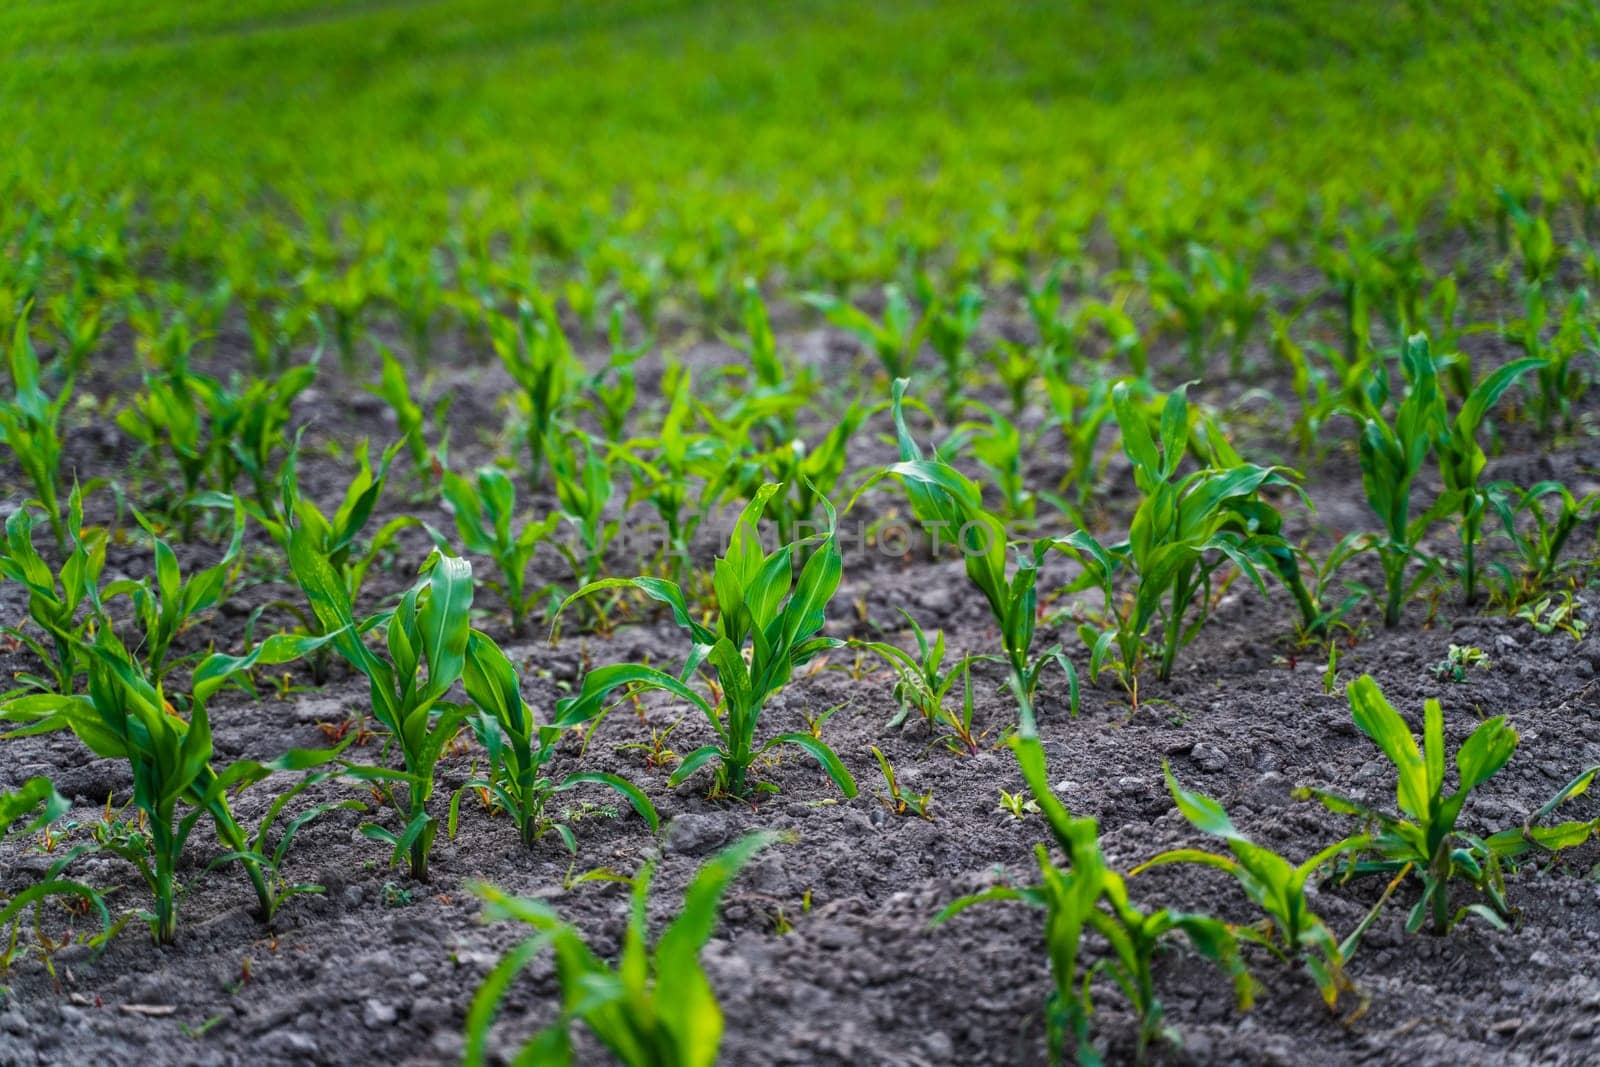 Rows of fresh green corn sprouts in spring on the field. Growing young green corn seedling sprouts in cultivated agricultural farm field. by vovsht